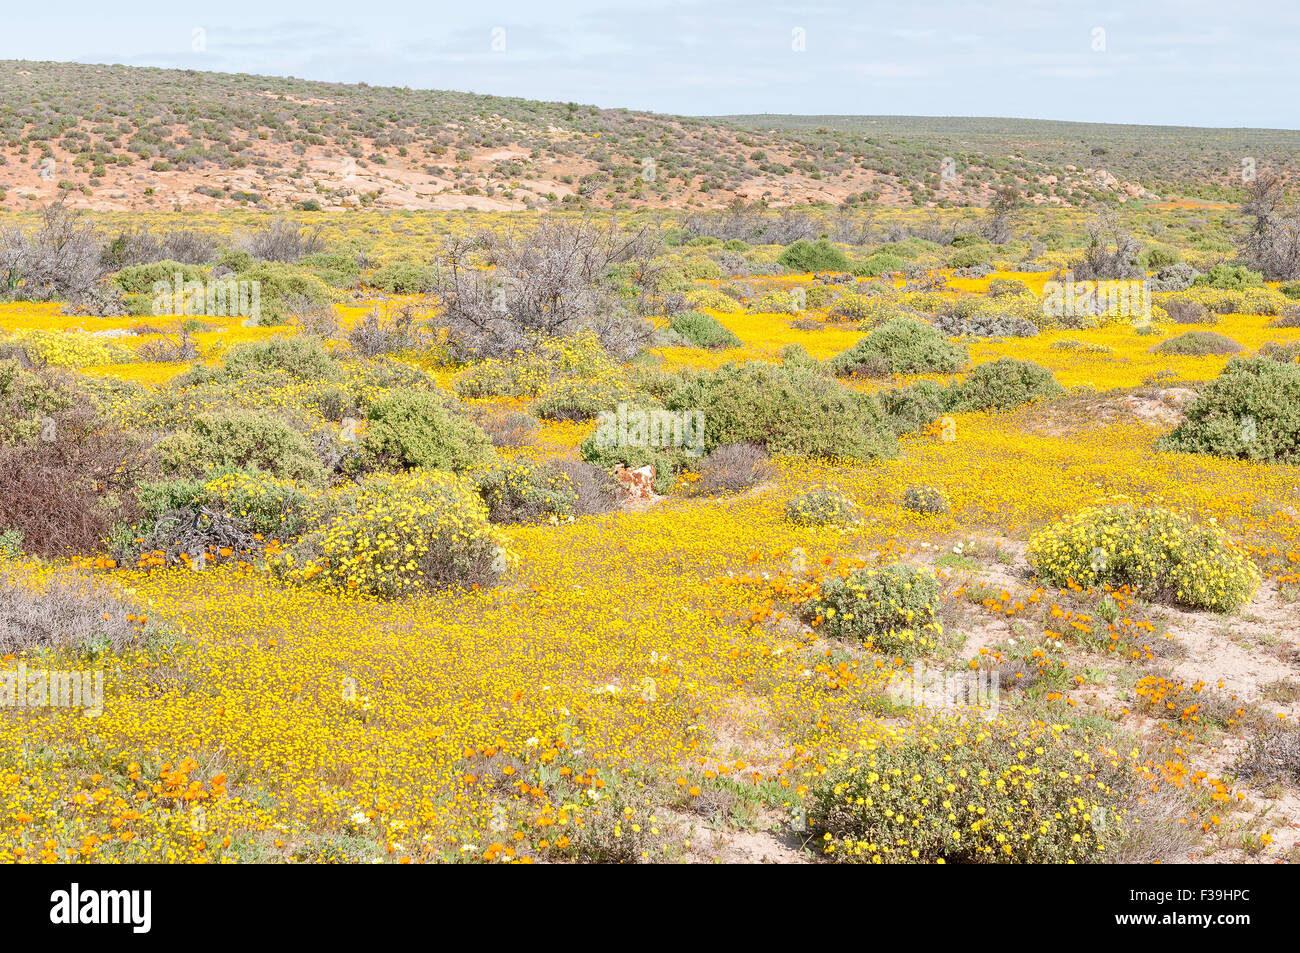 A field of yellow wild flowers near Soutfontein (salt fountain) in the Northern Cape Namaqualand region of South Africa Stock Photo